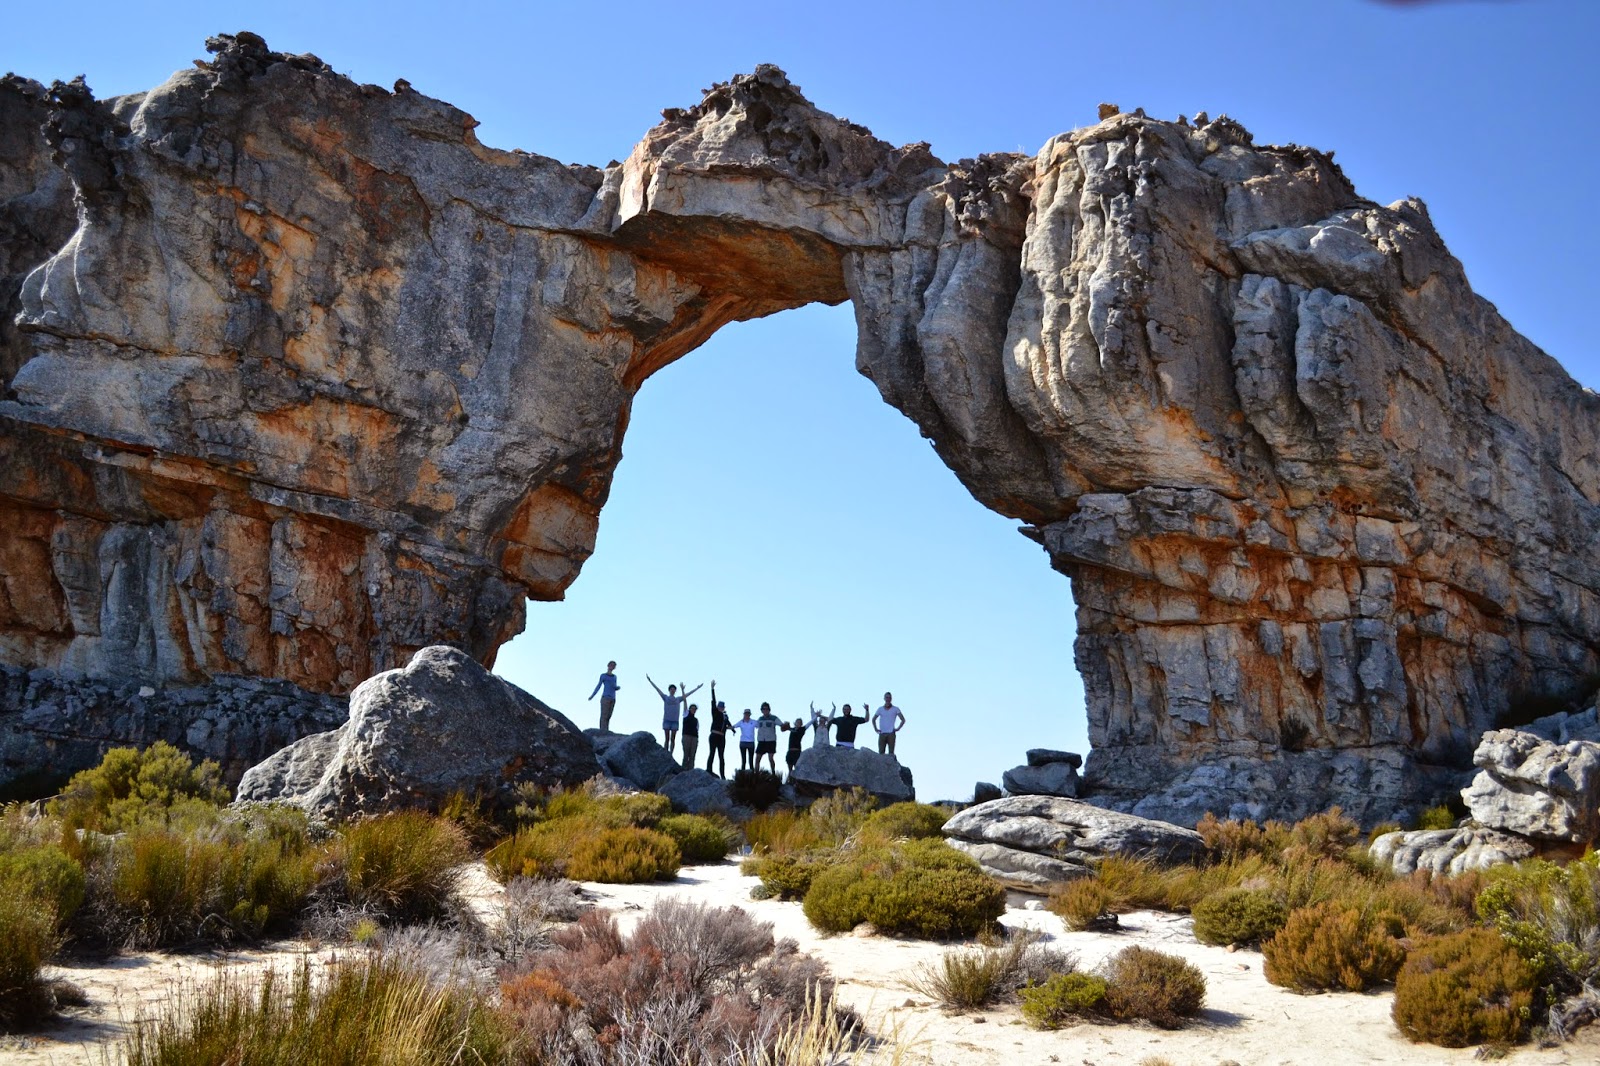 Wolfberg Arch with people underneath